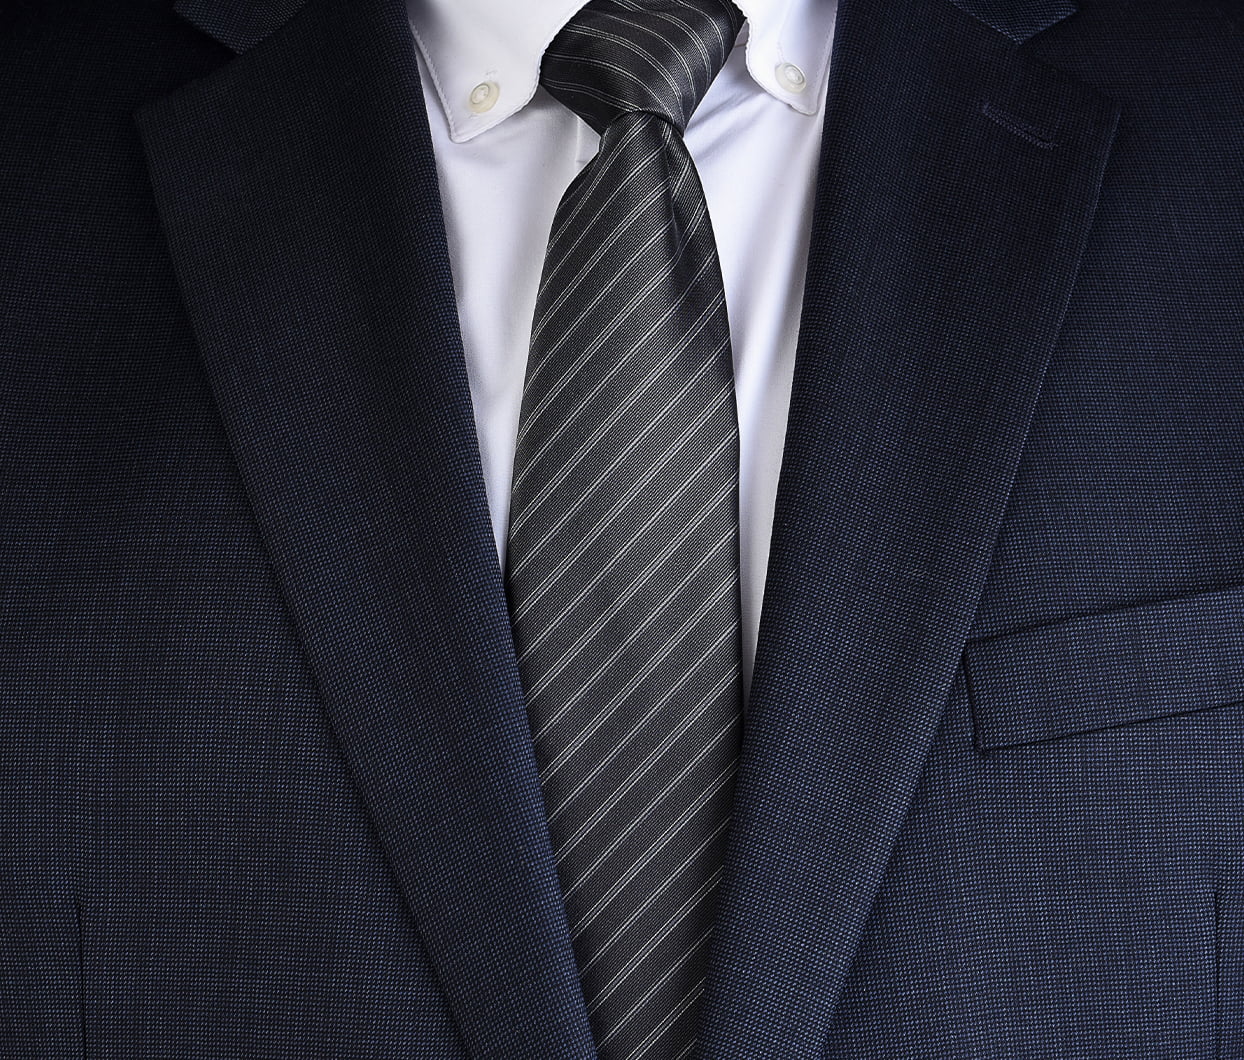 Custom Suits and Off-the-Rack: What's the Difference? - San's Suit ...